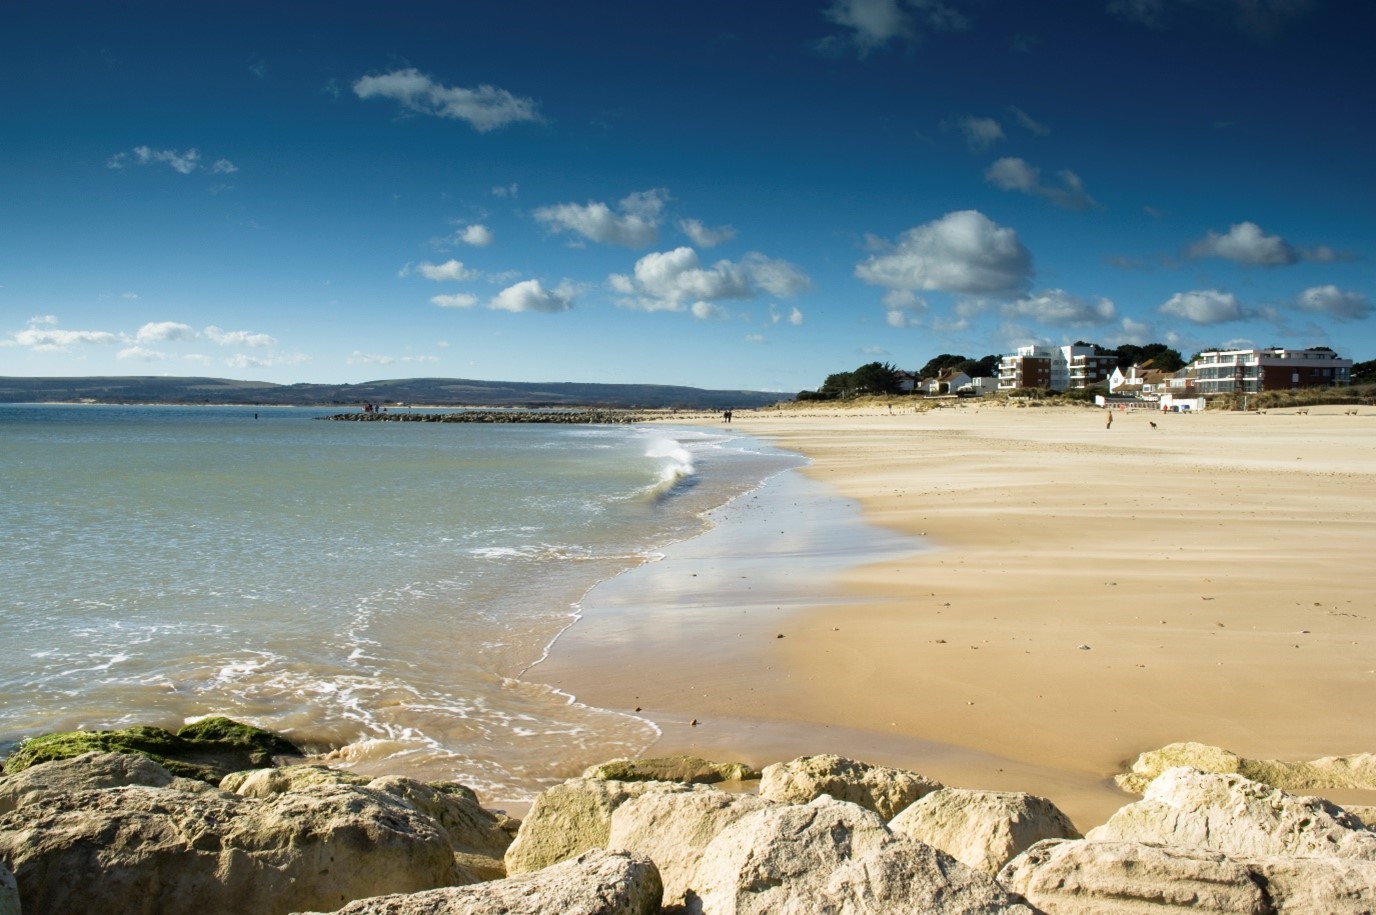 Sandbanks beach with the sand and sea in shot and buildings in the background with clouds in the sky